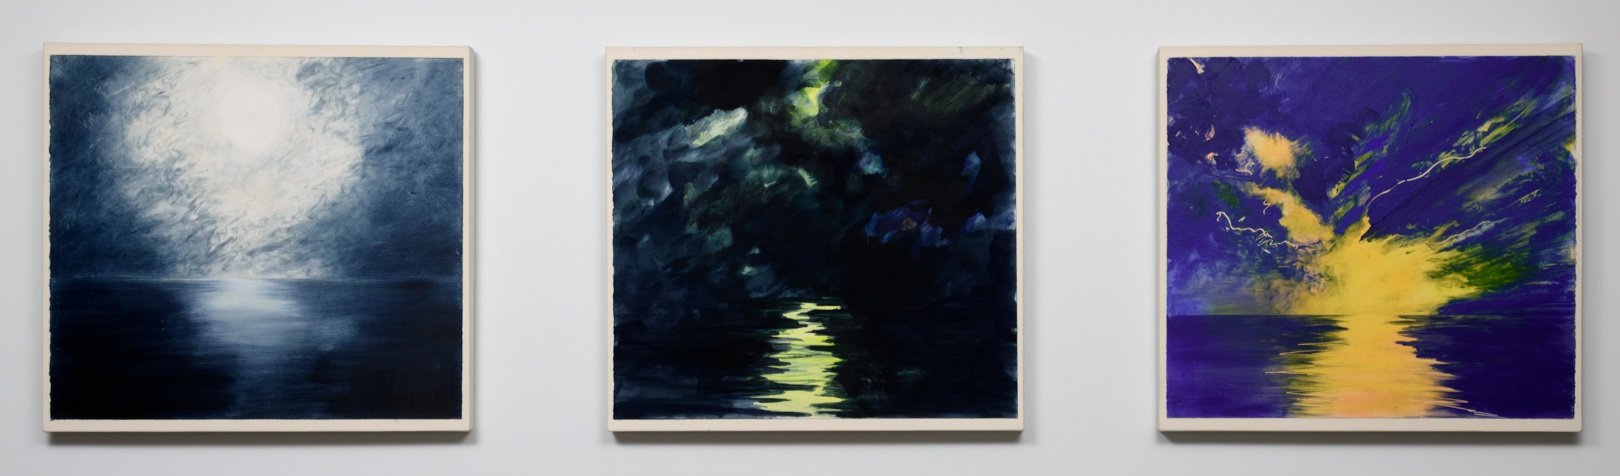  From left to right:  Peter Alexander,  Untitled (Moon Series) , 1986, Oil and wax medium on paper mounted on canvas, 31.5 x 34.25 inches. Courtesy of the Joan and Jack Quinn Family Collection  Peter Alexander,  Punta Cruces,  1986, oil and wax mediu